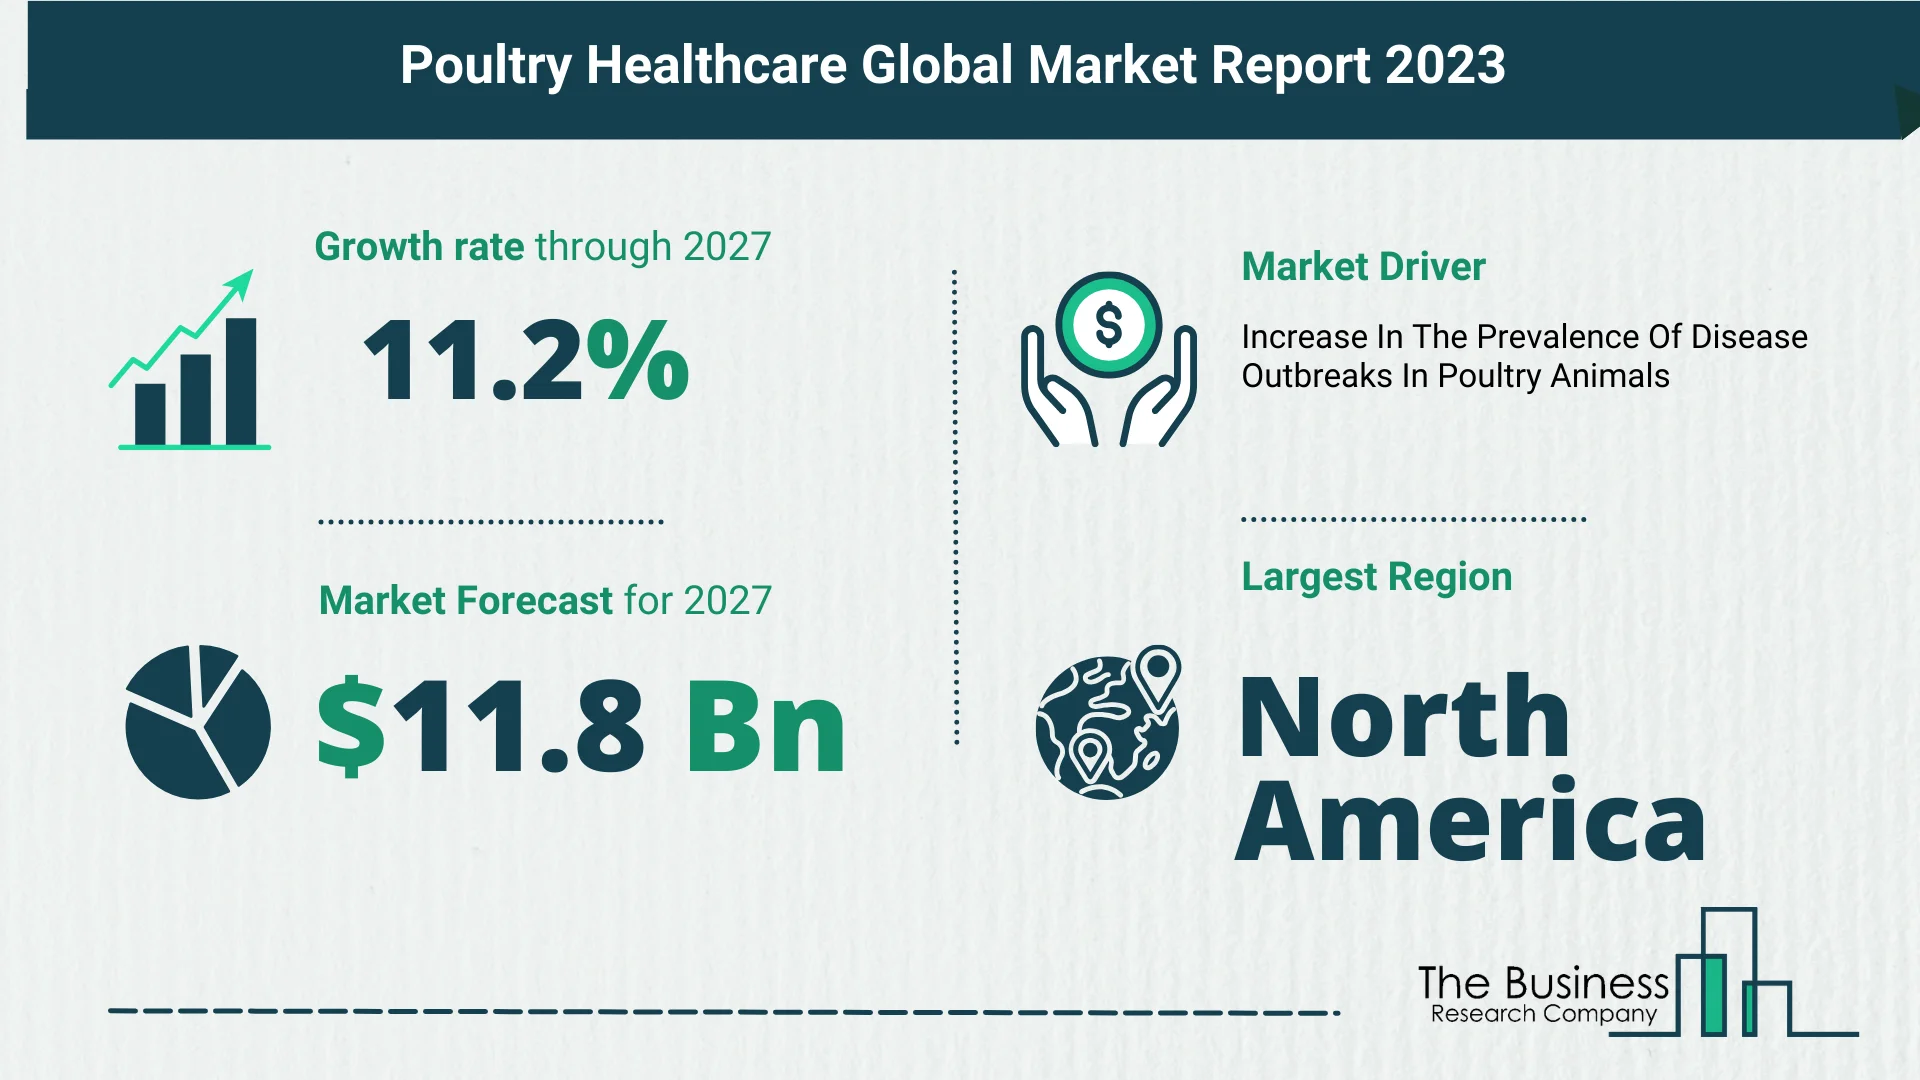 Top 5 Insights From The Poultry Healthcare Market Report 2023